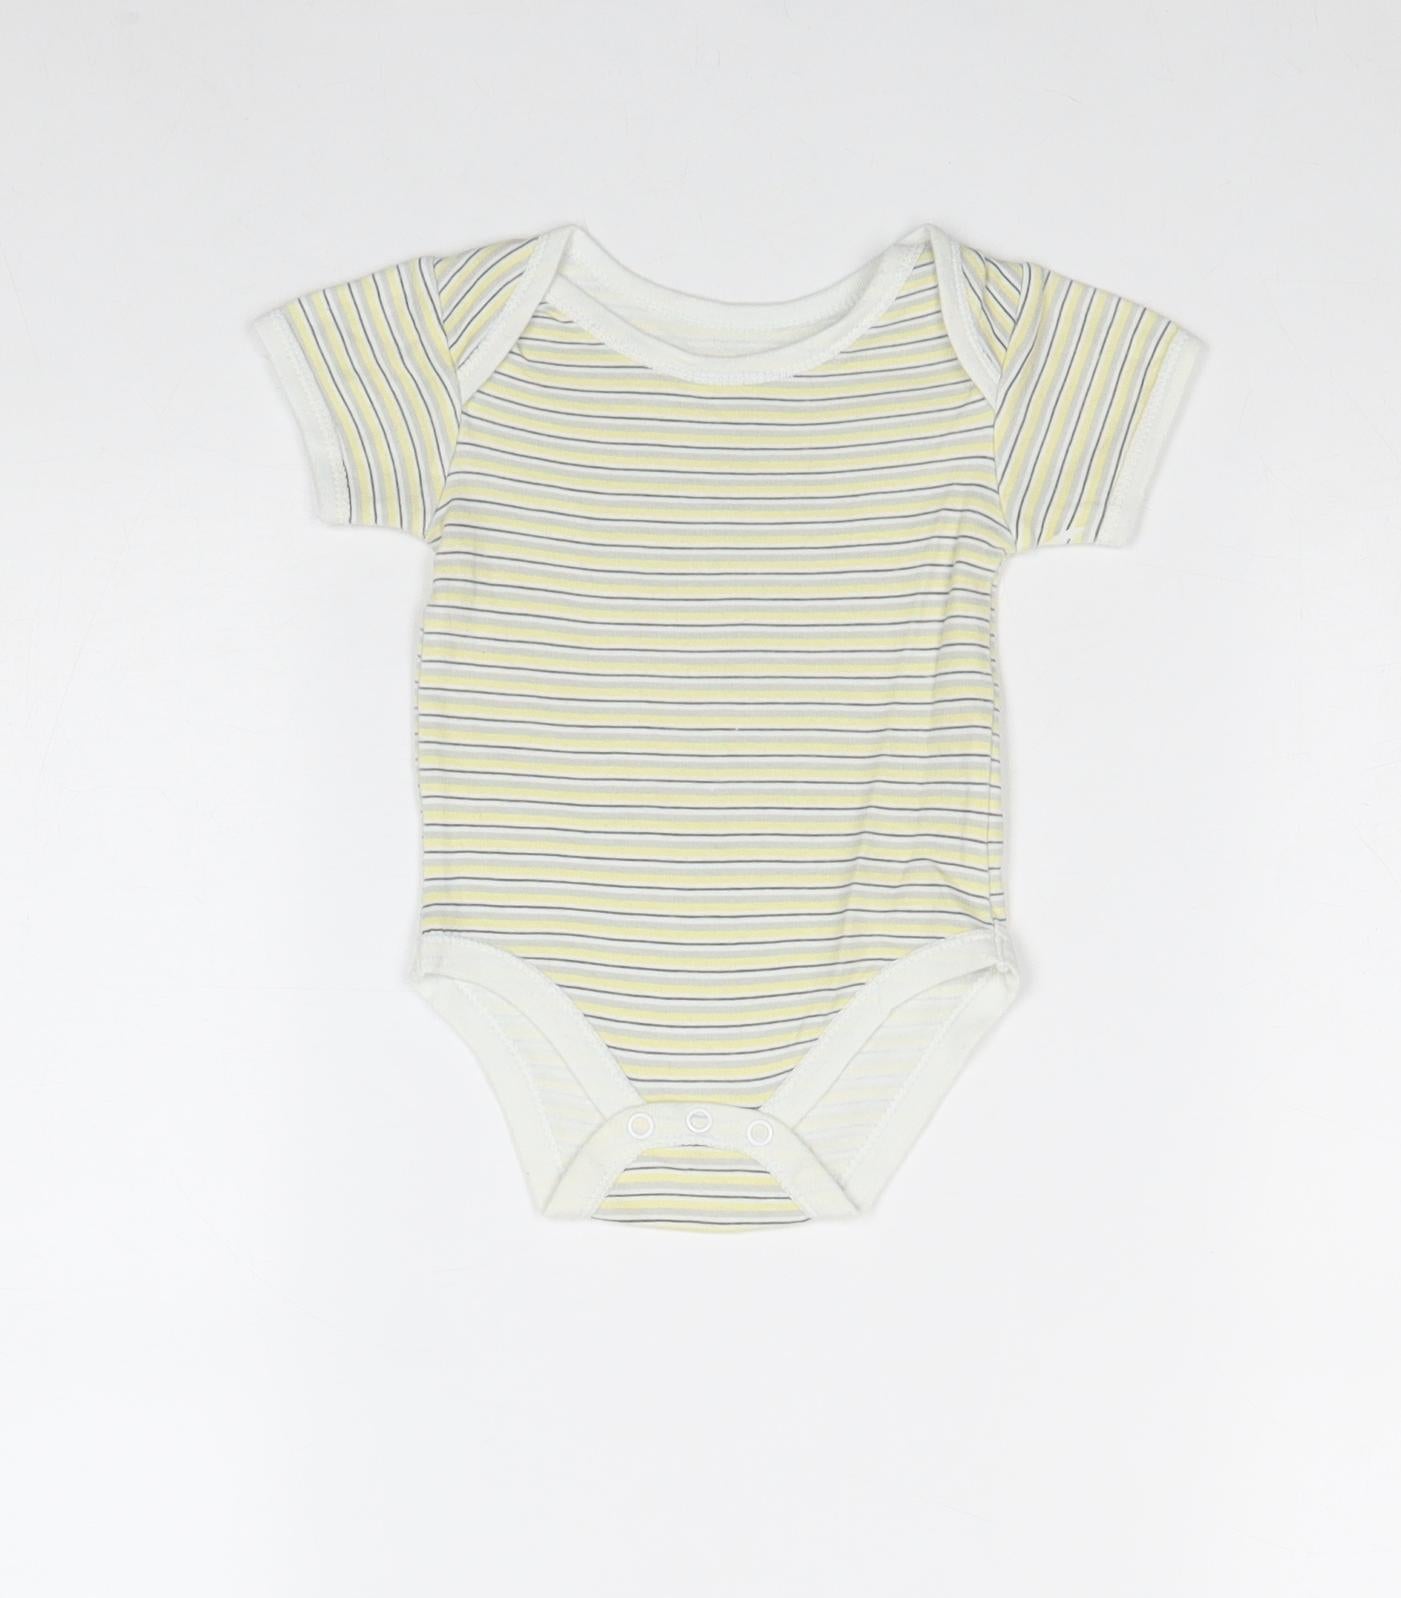 Earlydays Baby Yellow Striped 100% Cotton Babygrow One-Piece Size 3-6 Months Snap